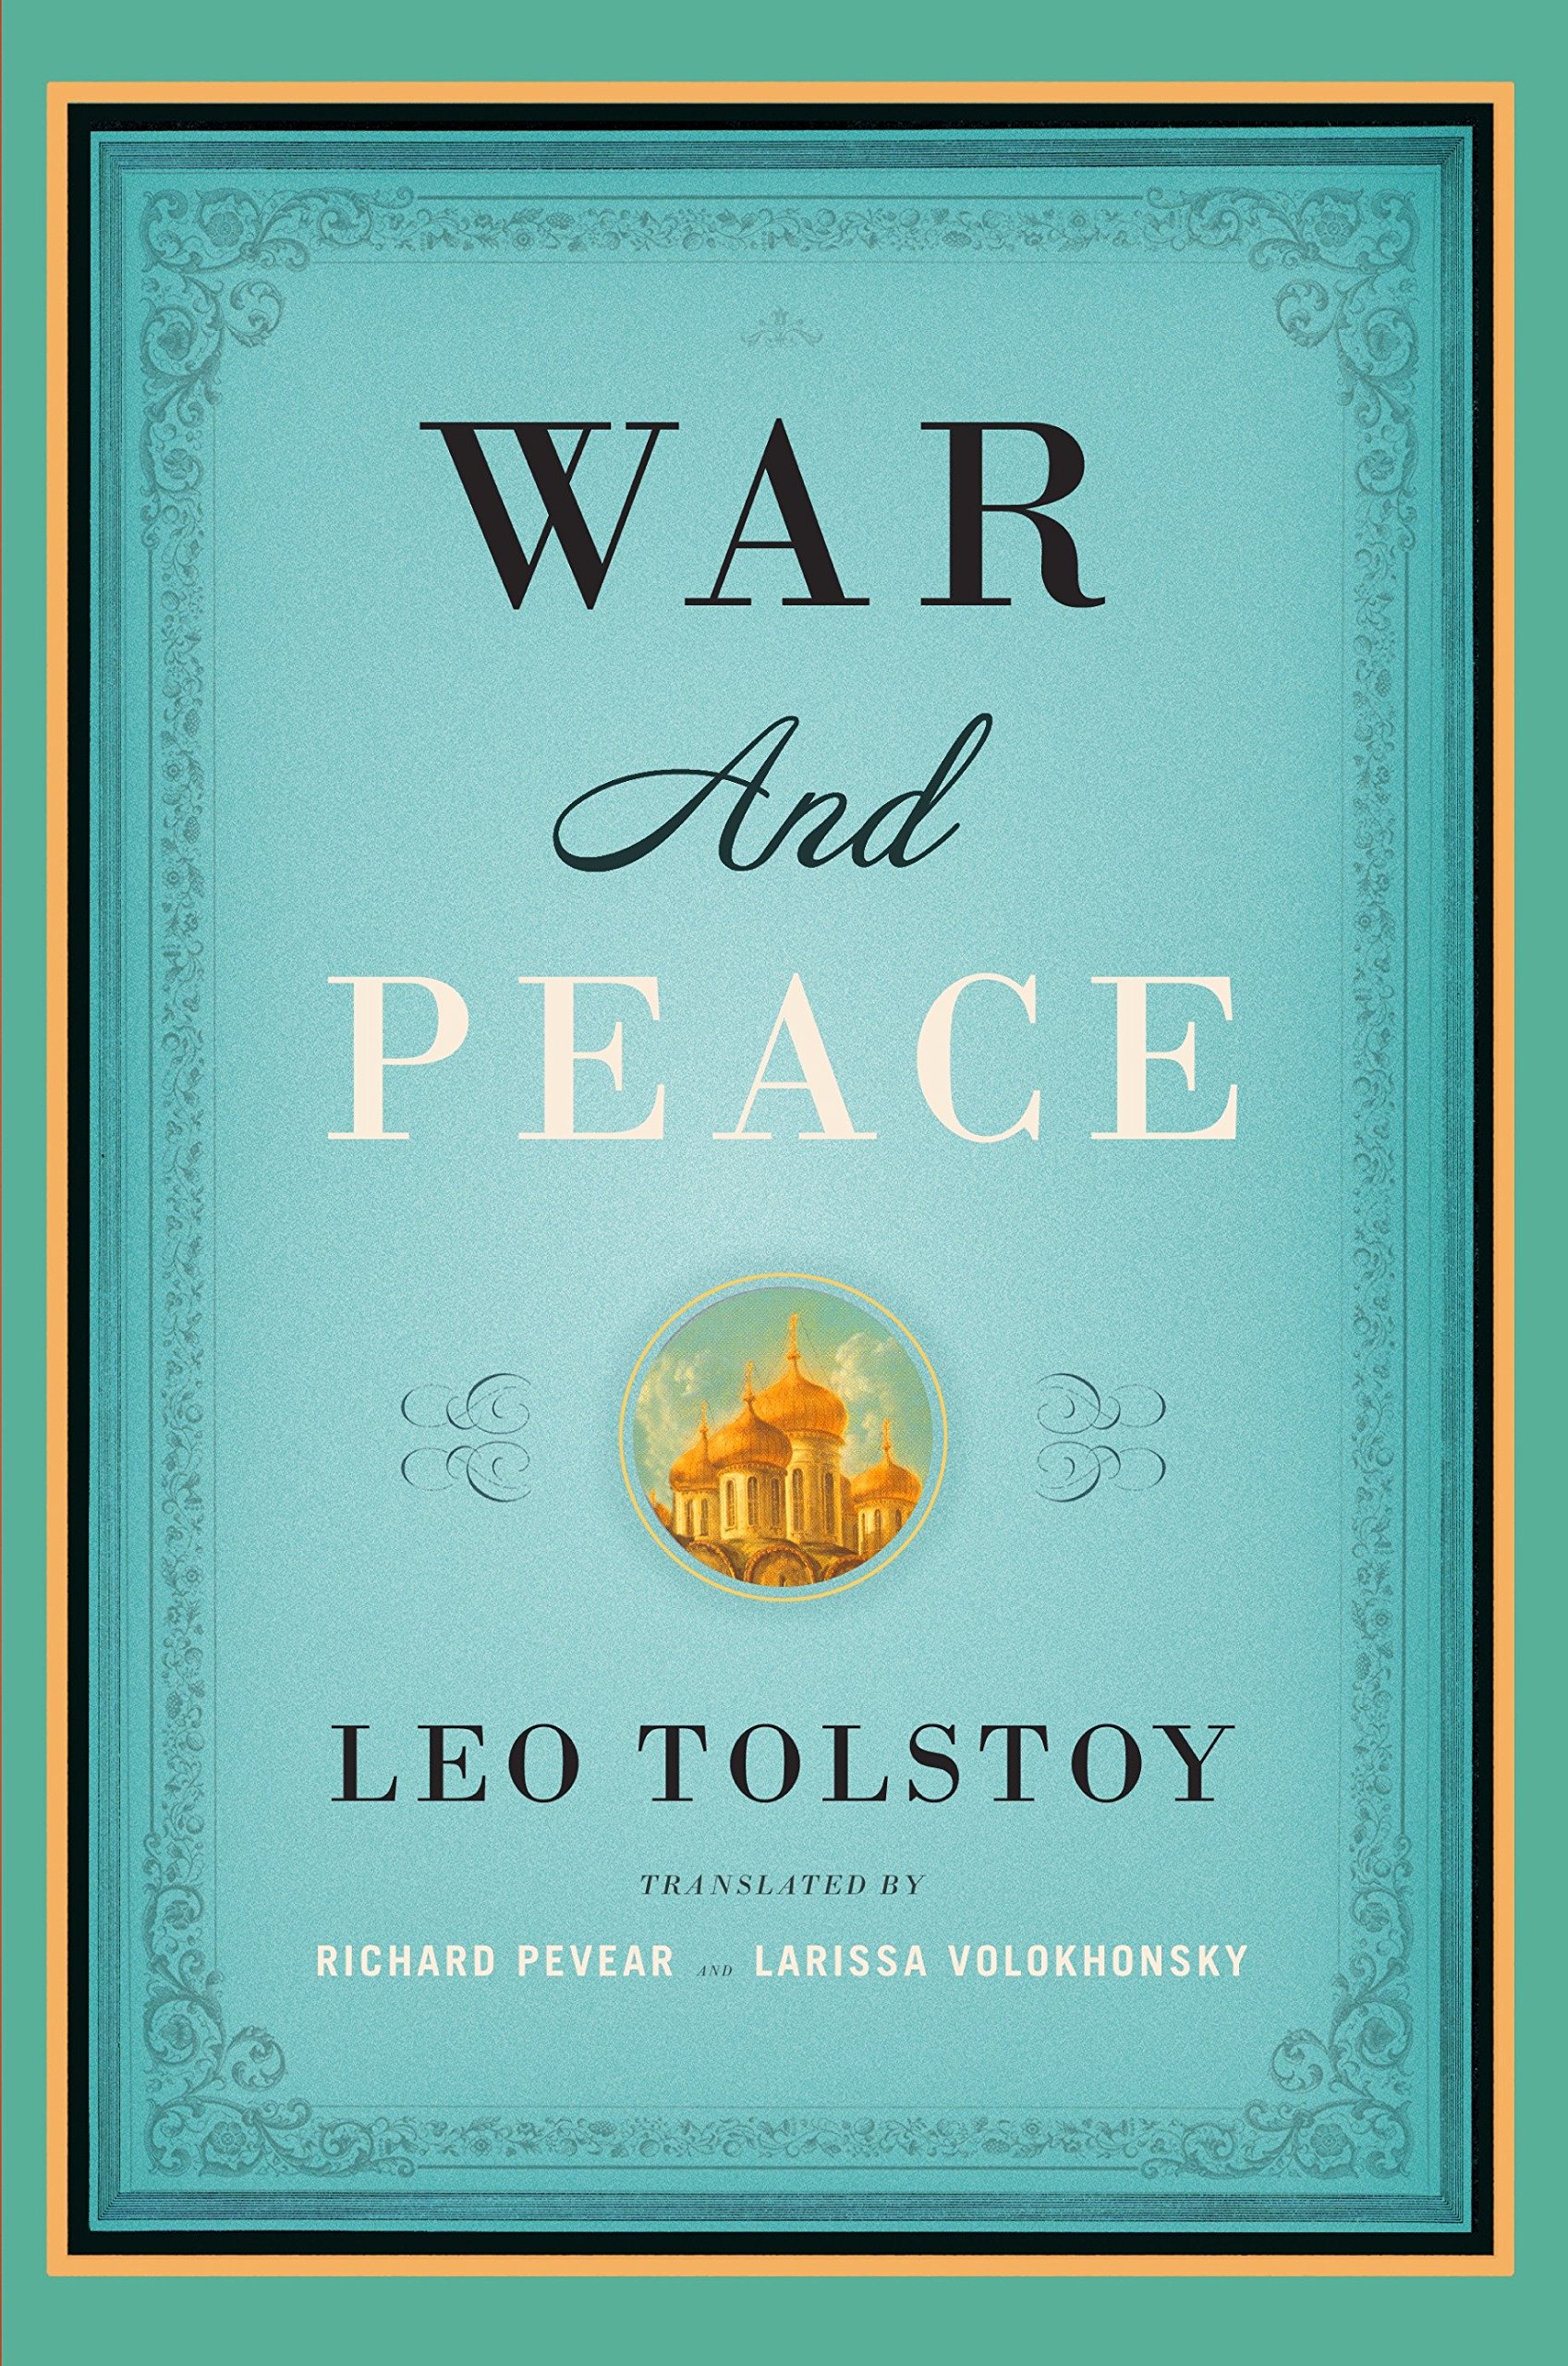 An affirmation of life itself in War and Peace audiobook by Leo Tolstoy